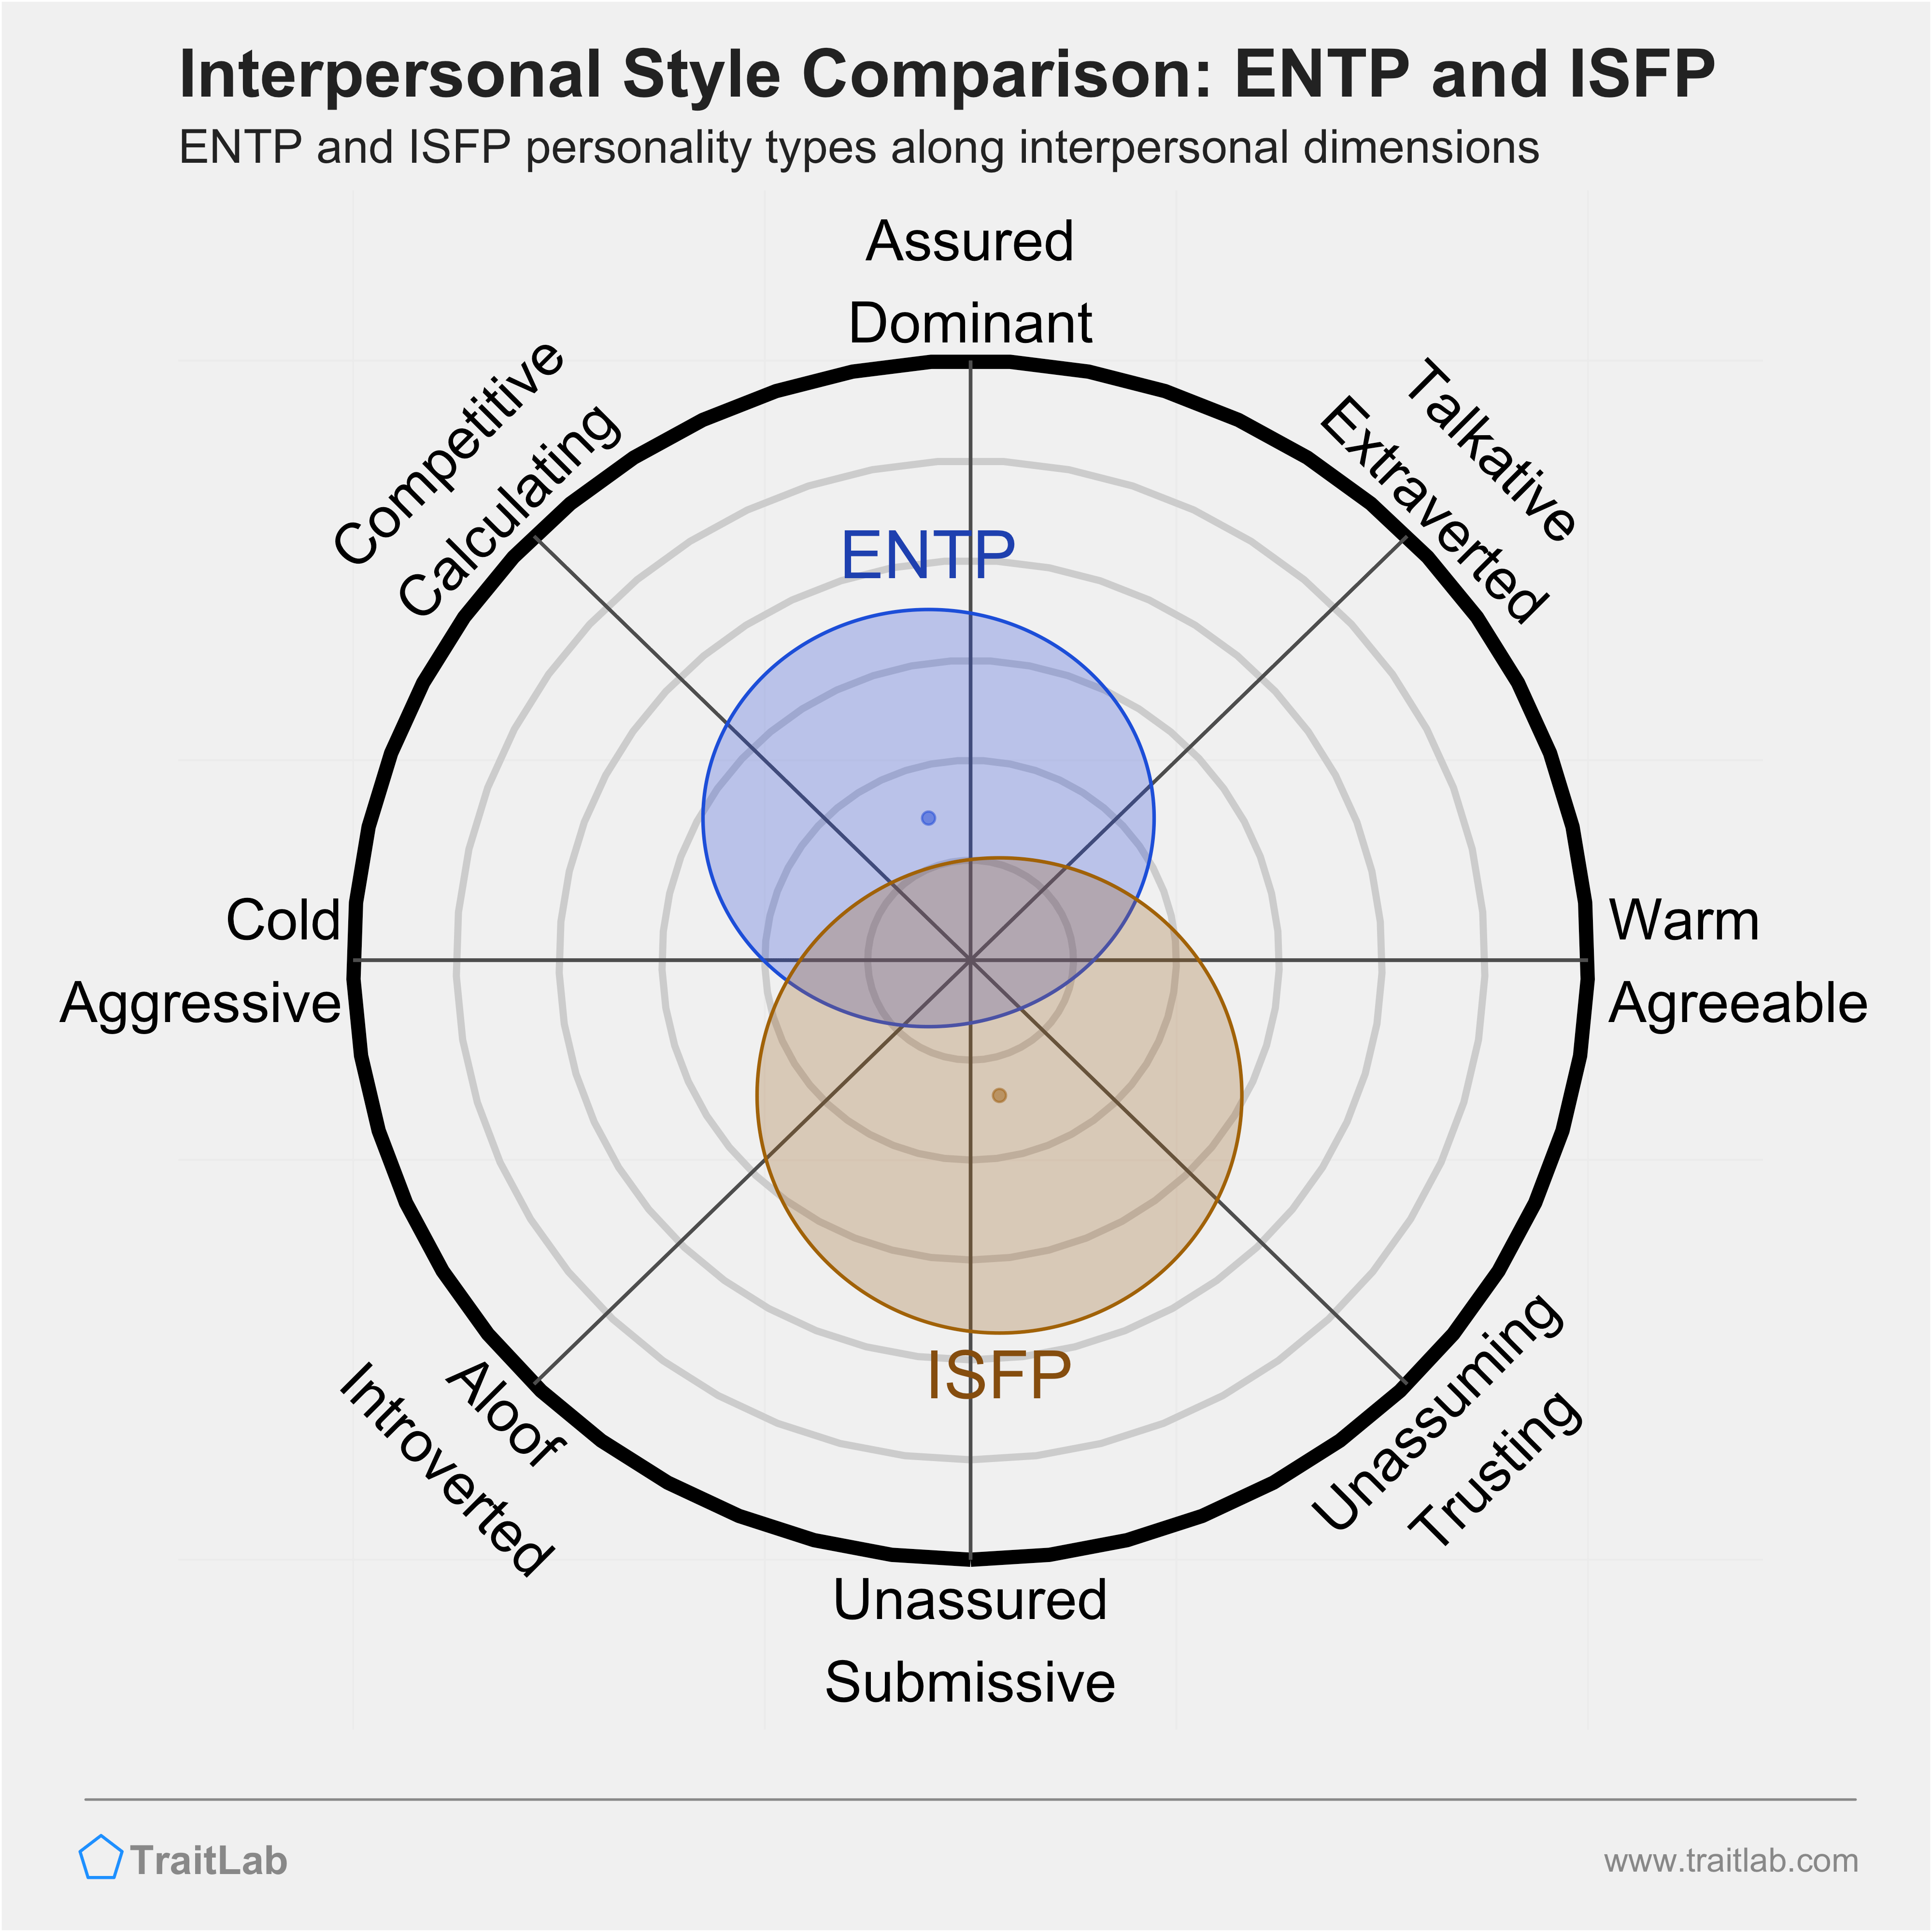 ENTP and ISFP comparison across interpersonal dimensions